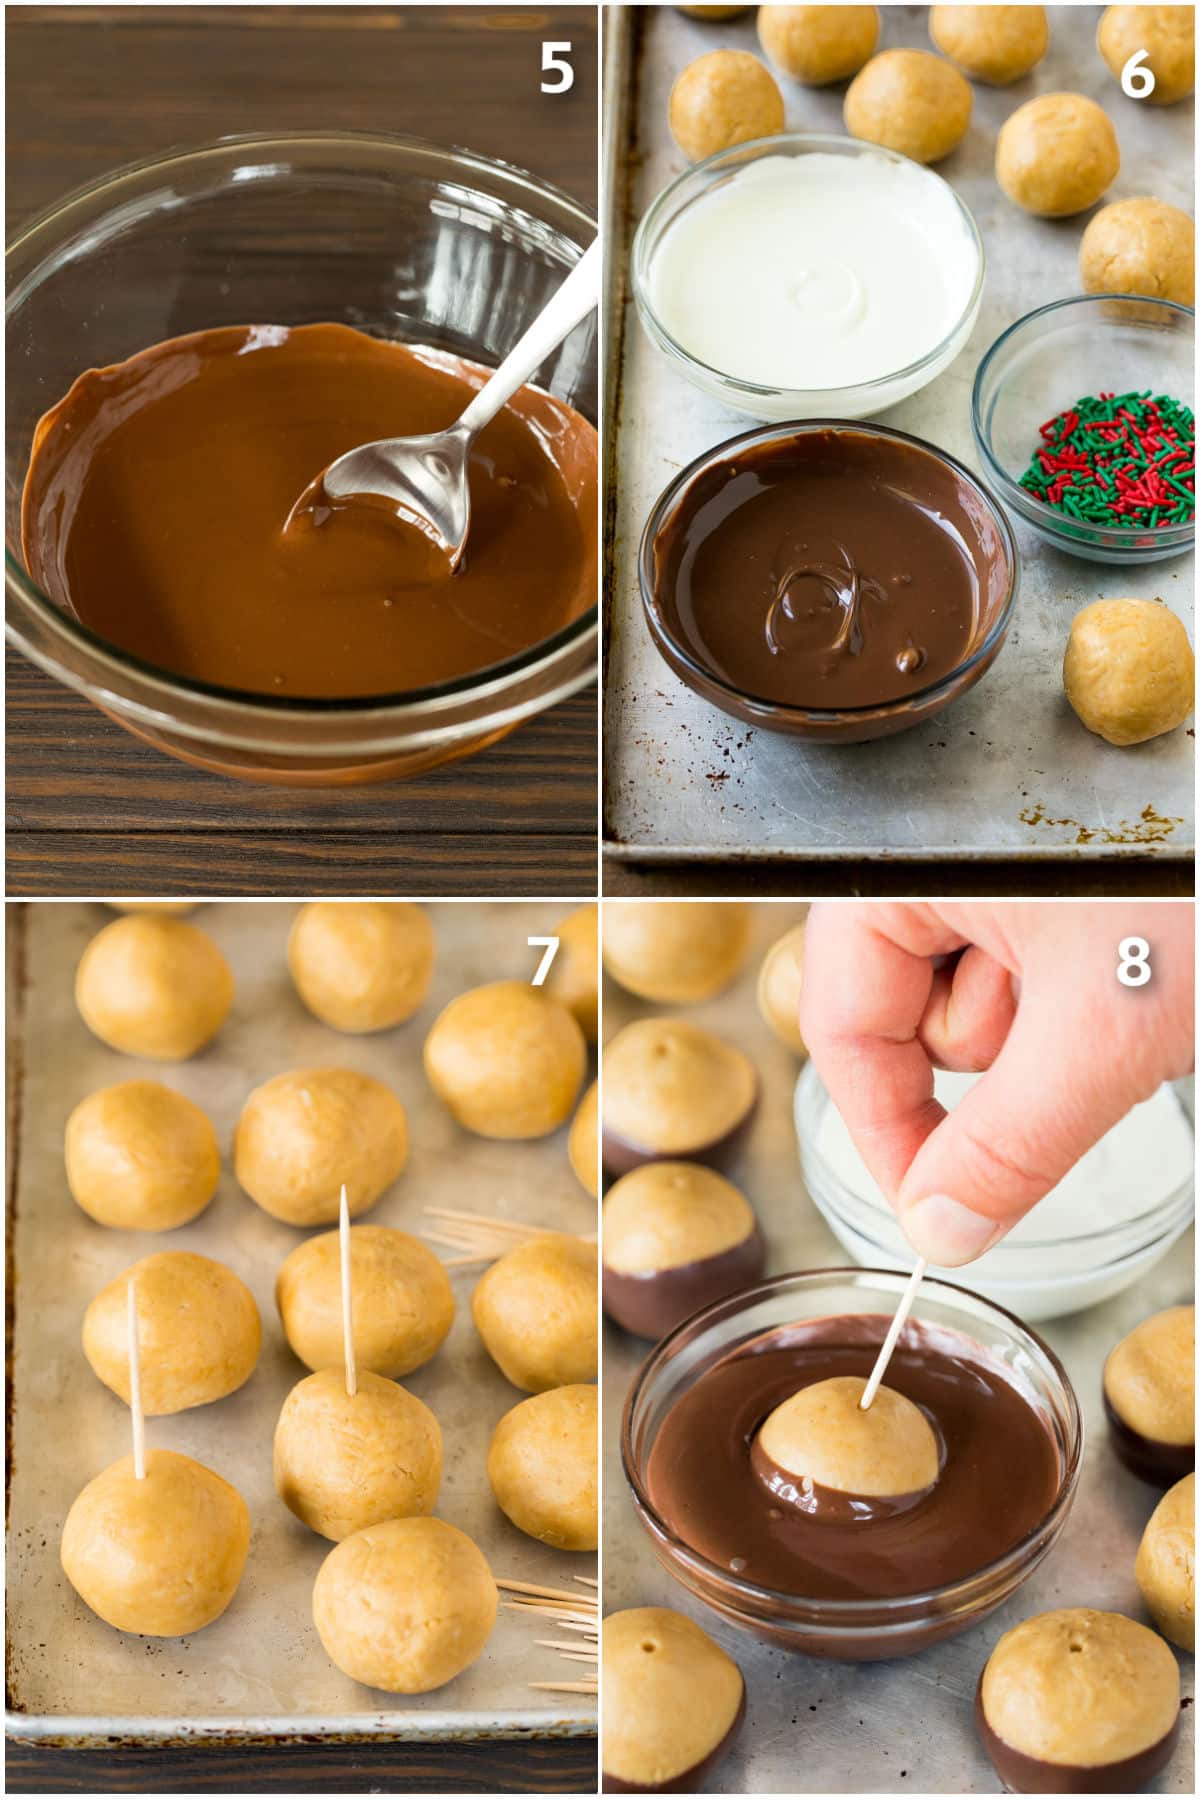 Process photos showing peanut butter balls being dipped in chocolate.